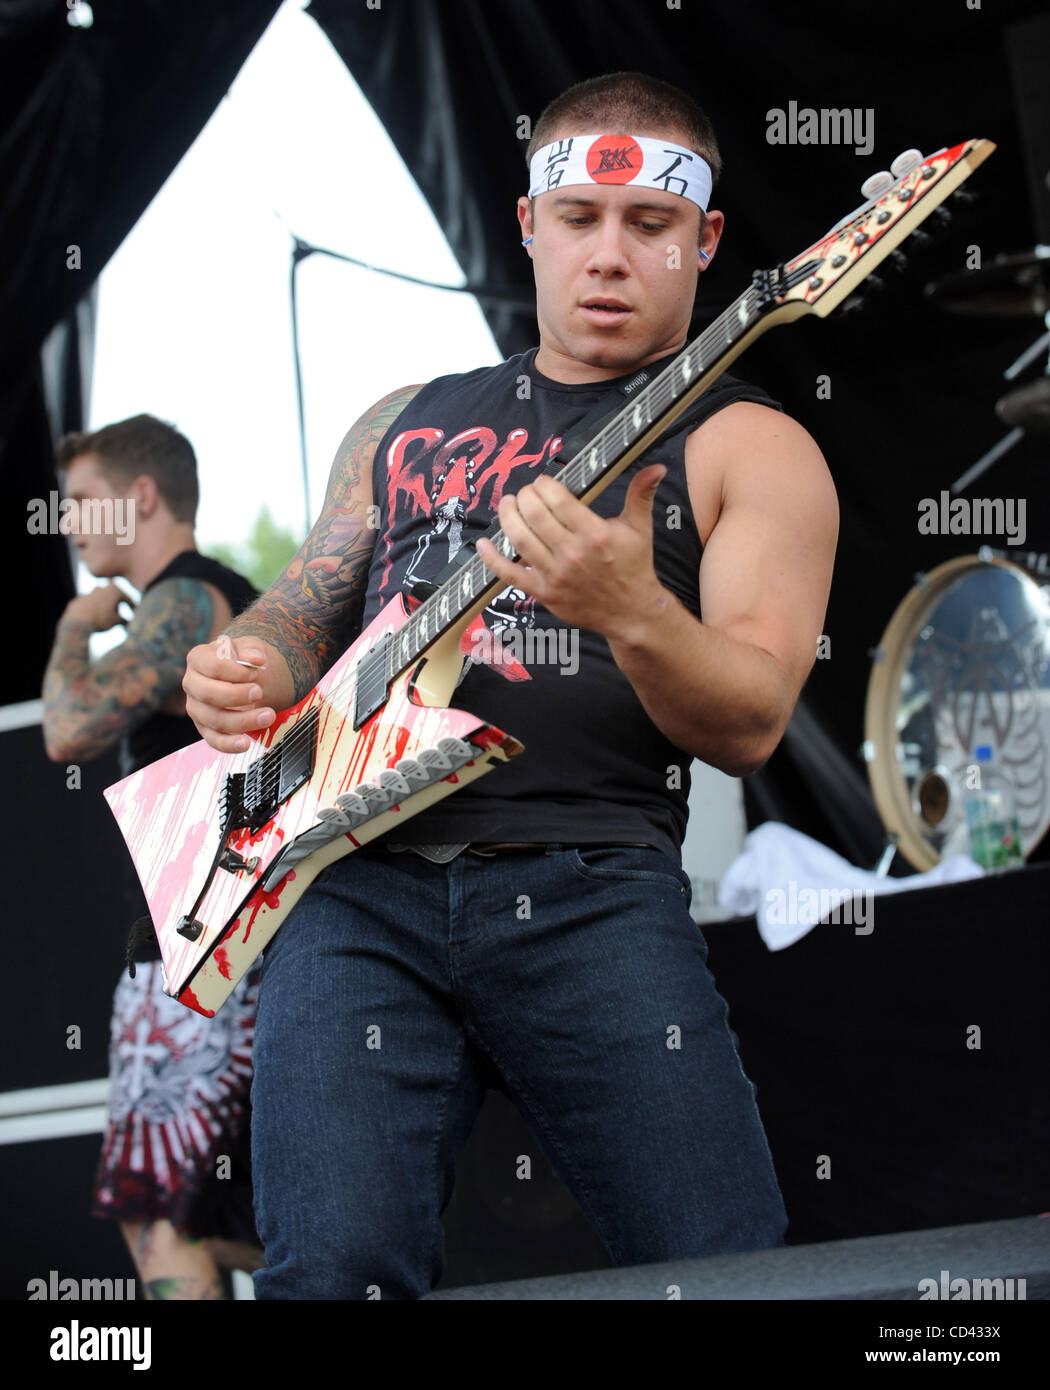 July 25, 2008 - Raleigh, North Carolina; USA - Guitarist DAN JACOBS of the  band Atreyu performs live as the 2008 Projekt Revolution Tour makes a stop  at the Time Warner Cable